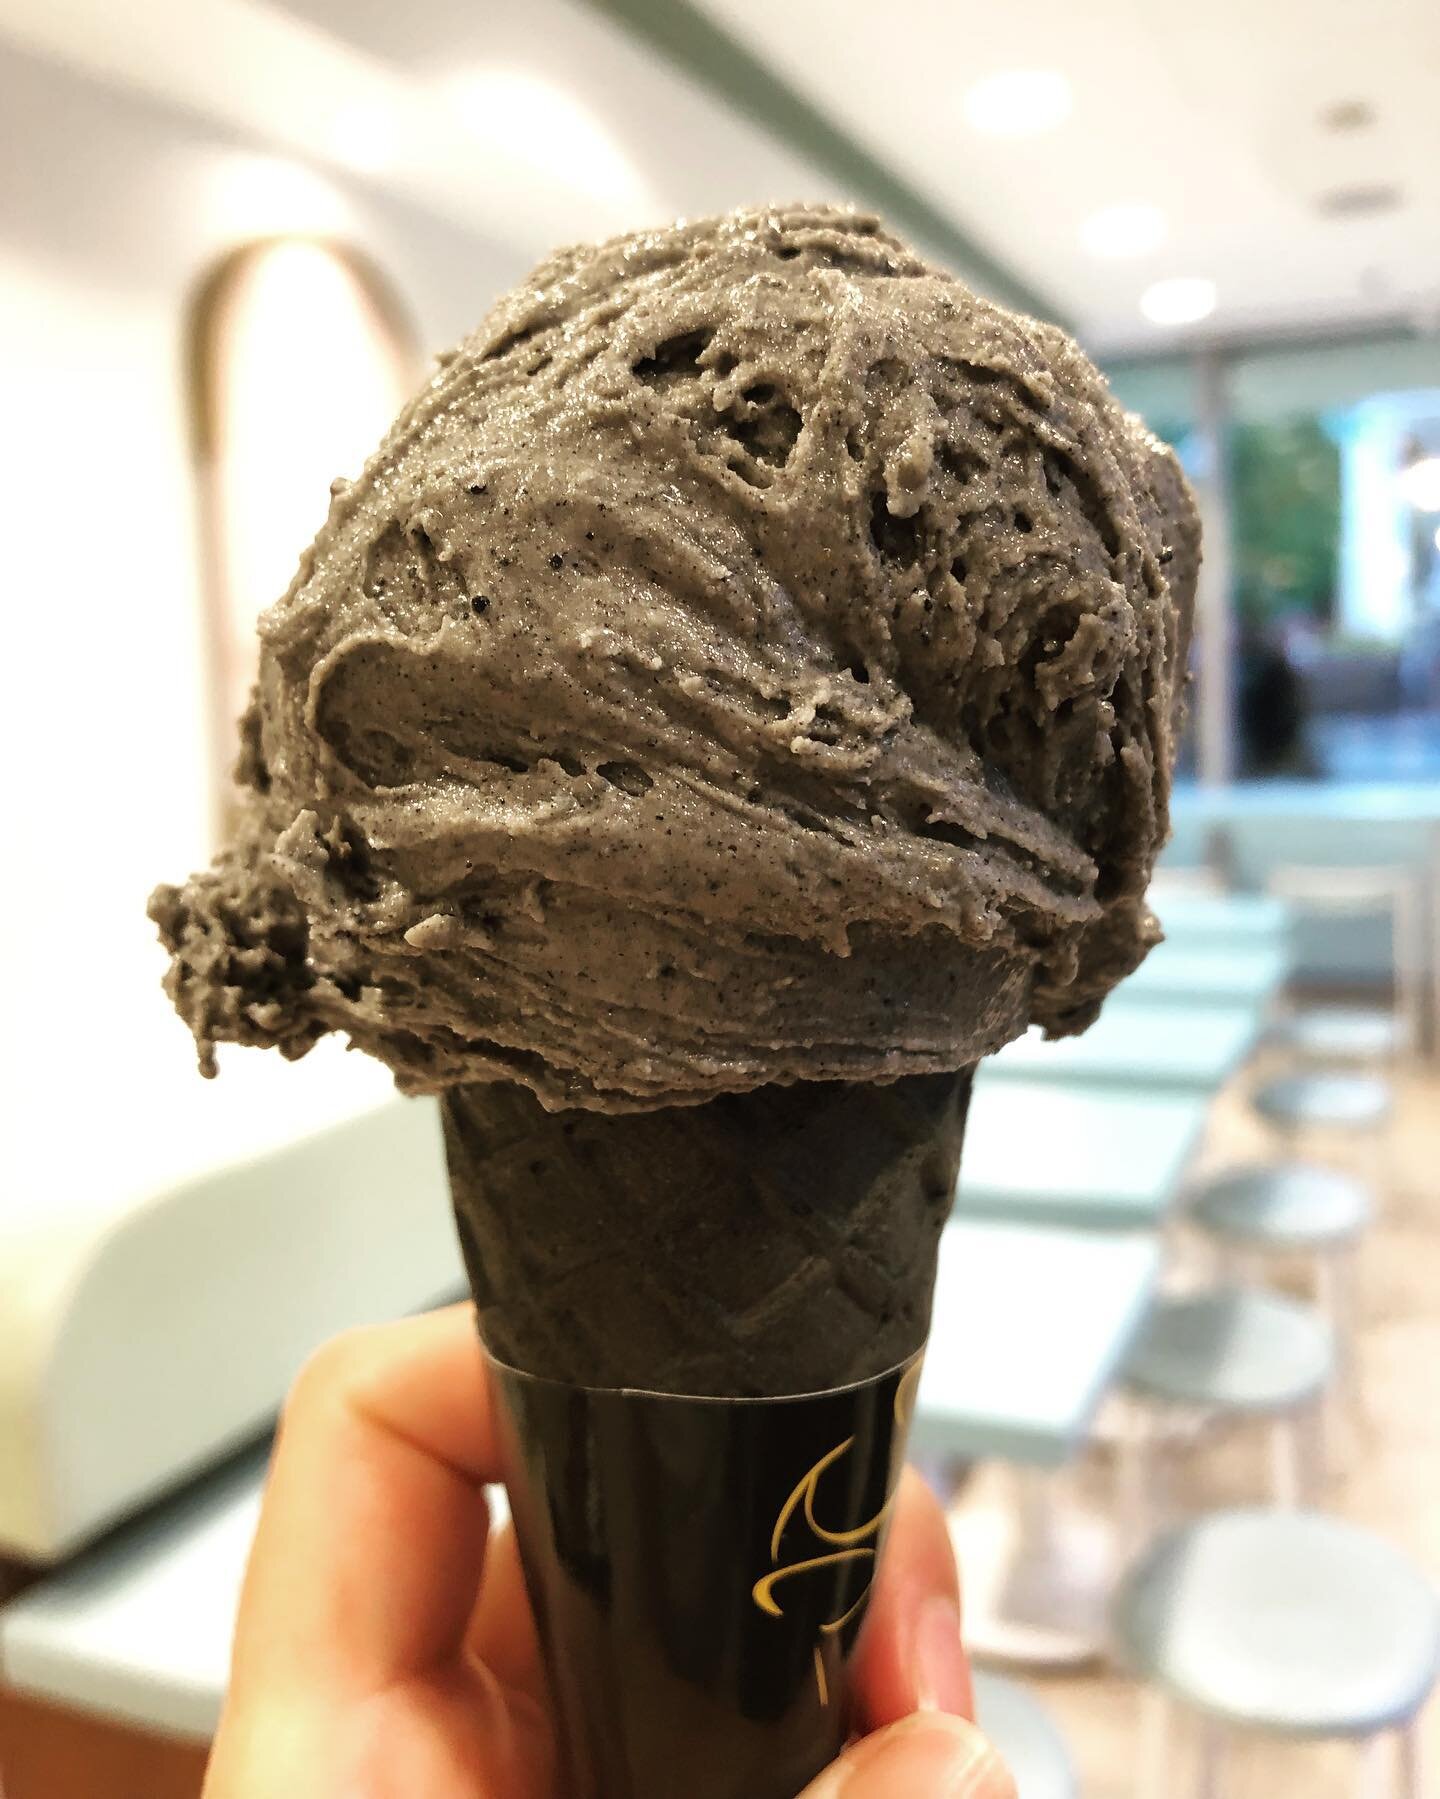 Not big on Halloween but did have this very spooky cone in Vancouver last month 🖤👻🖤 Black-sesame gelato is amazing, who knew? #spookycones